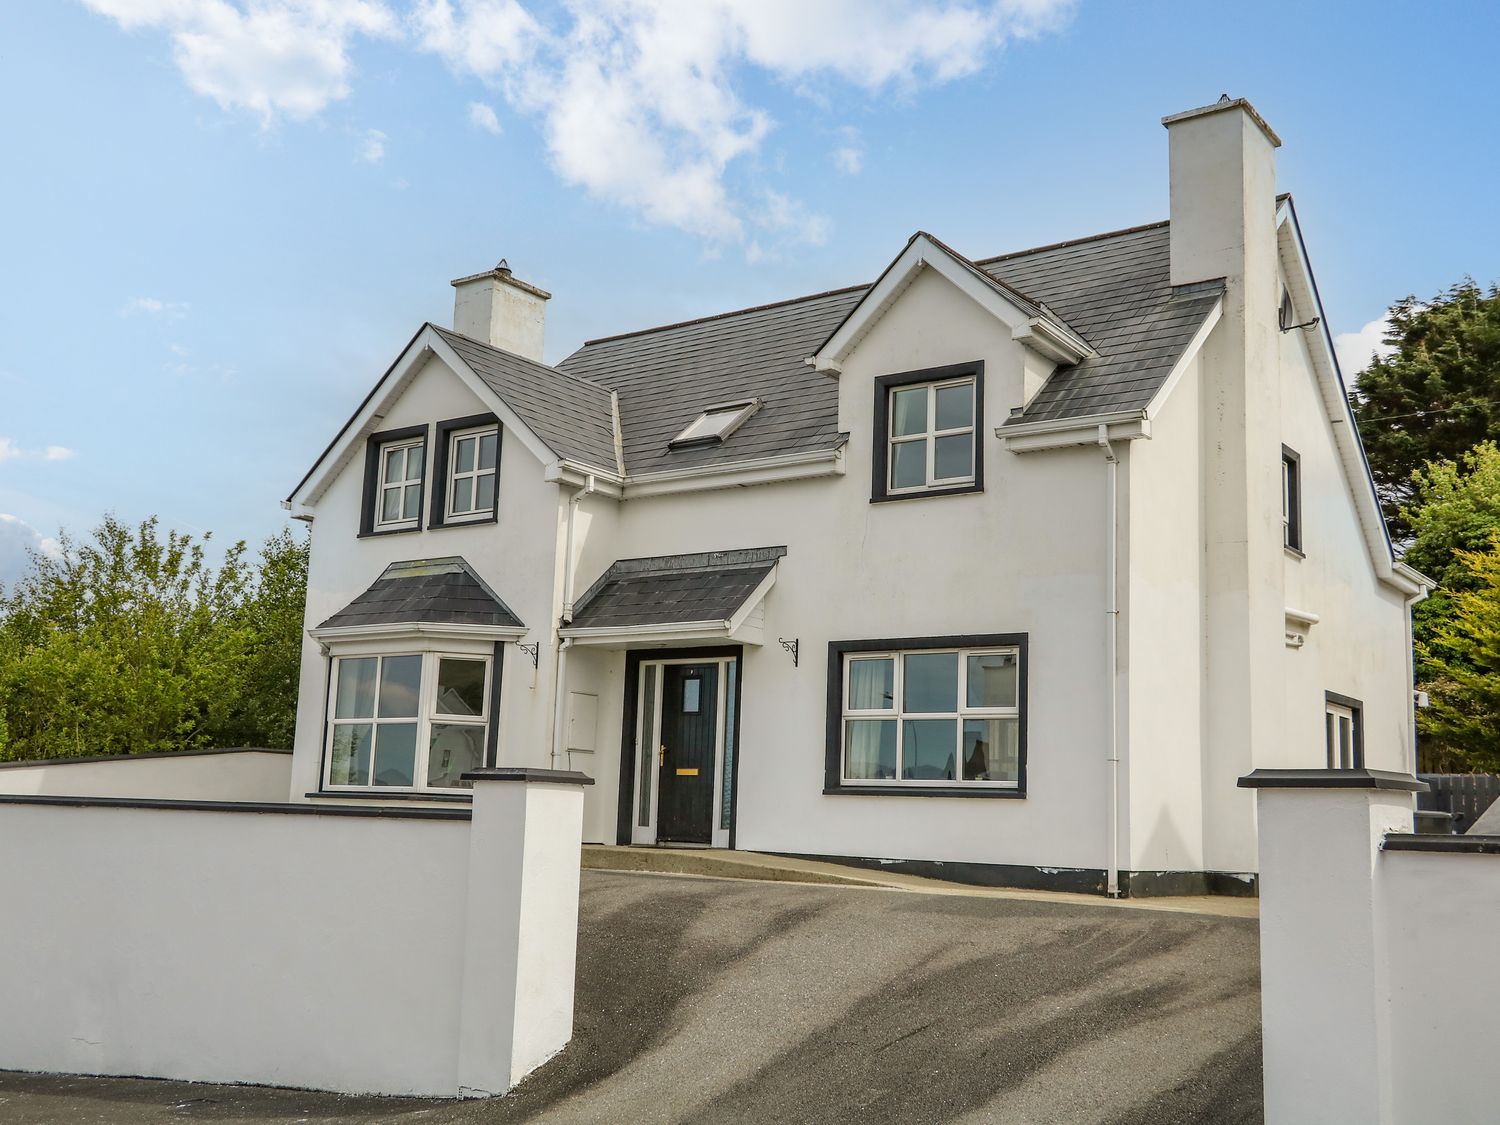 12 Hillview - County Donegal - 1109418 - photo 1